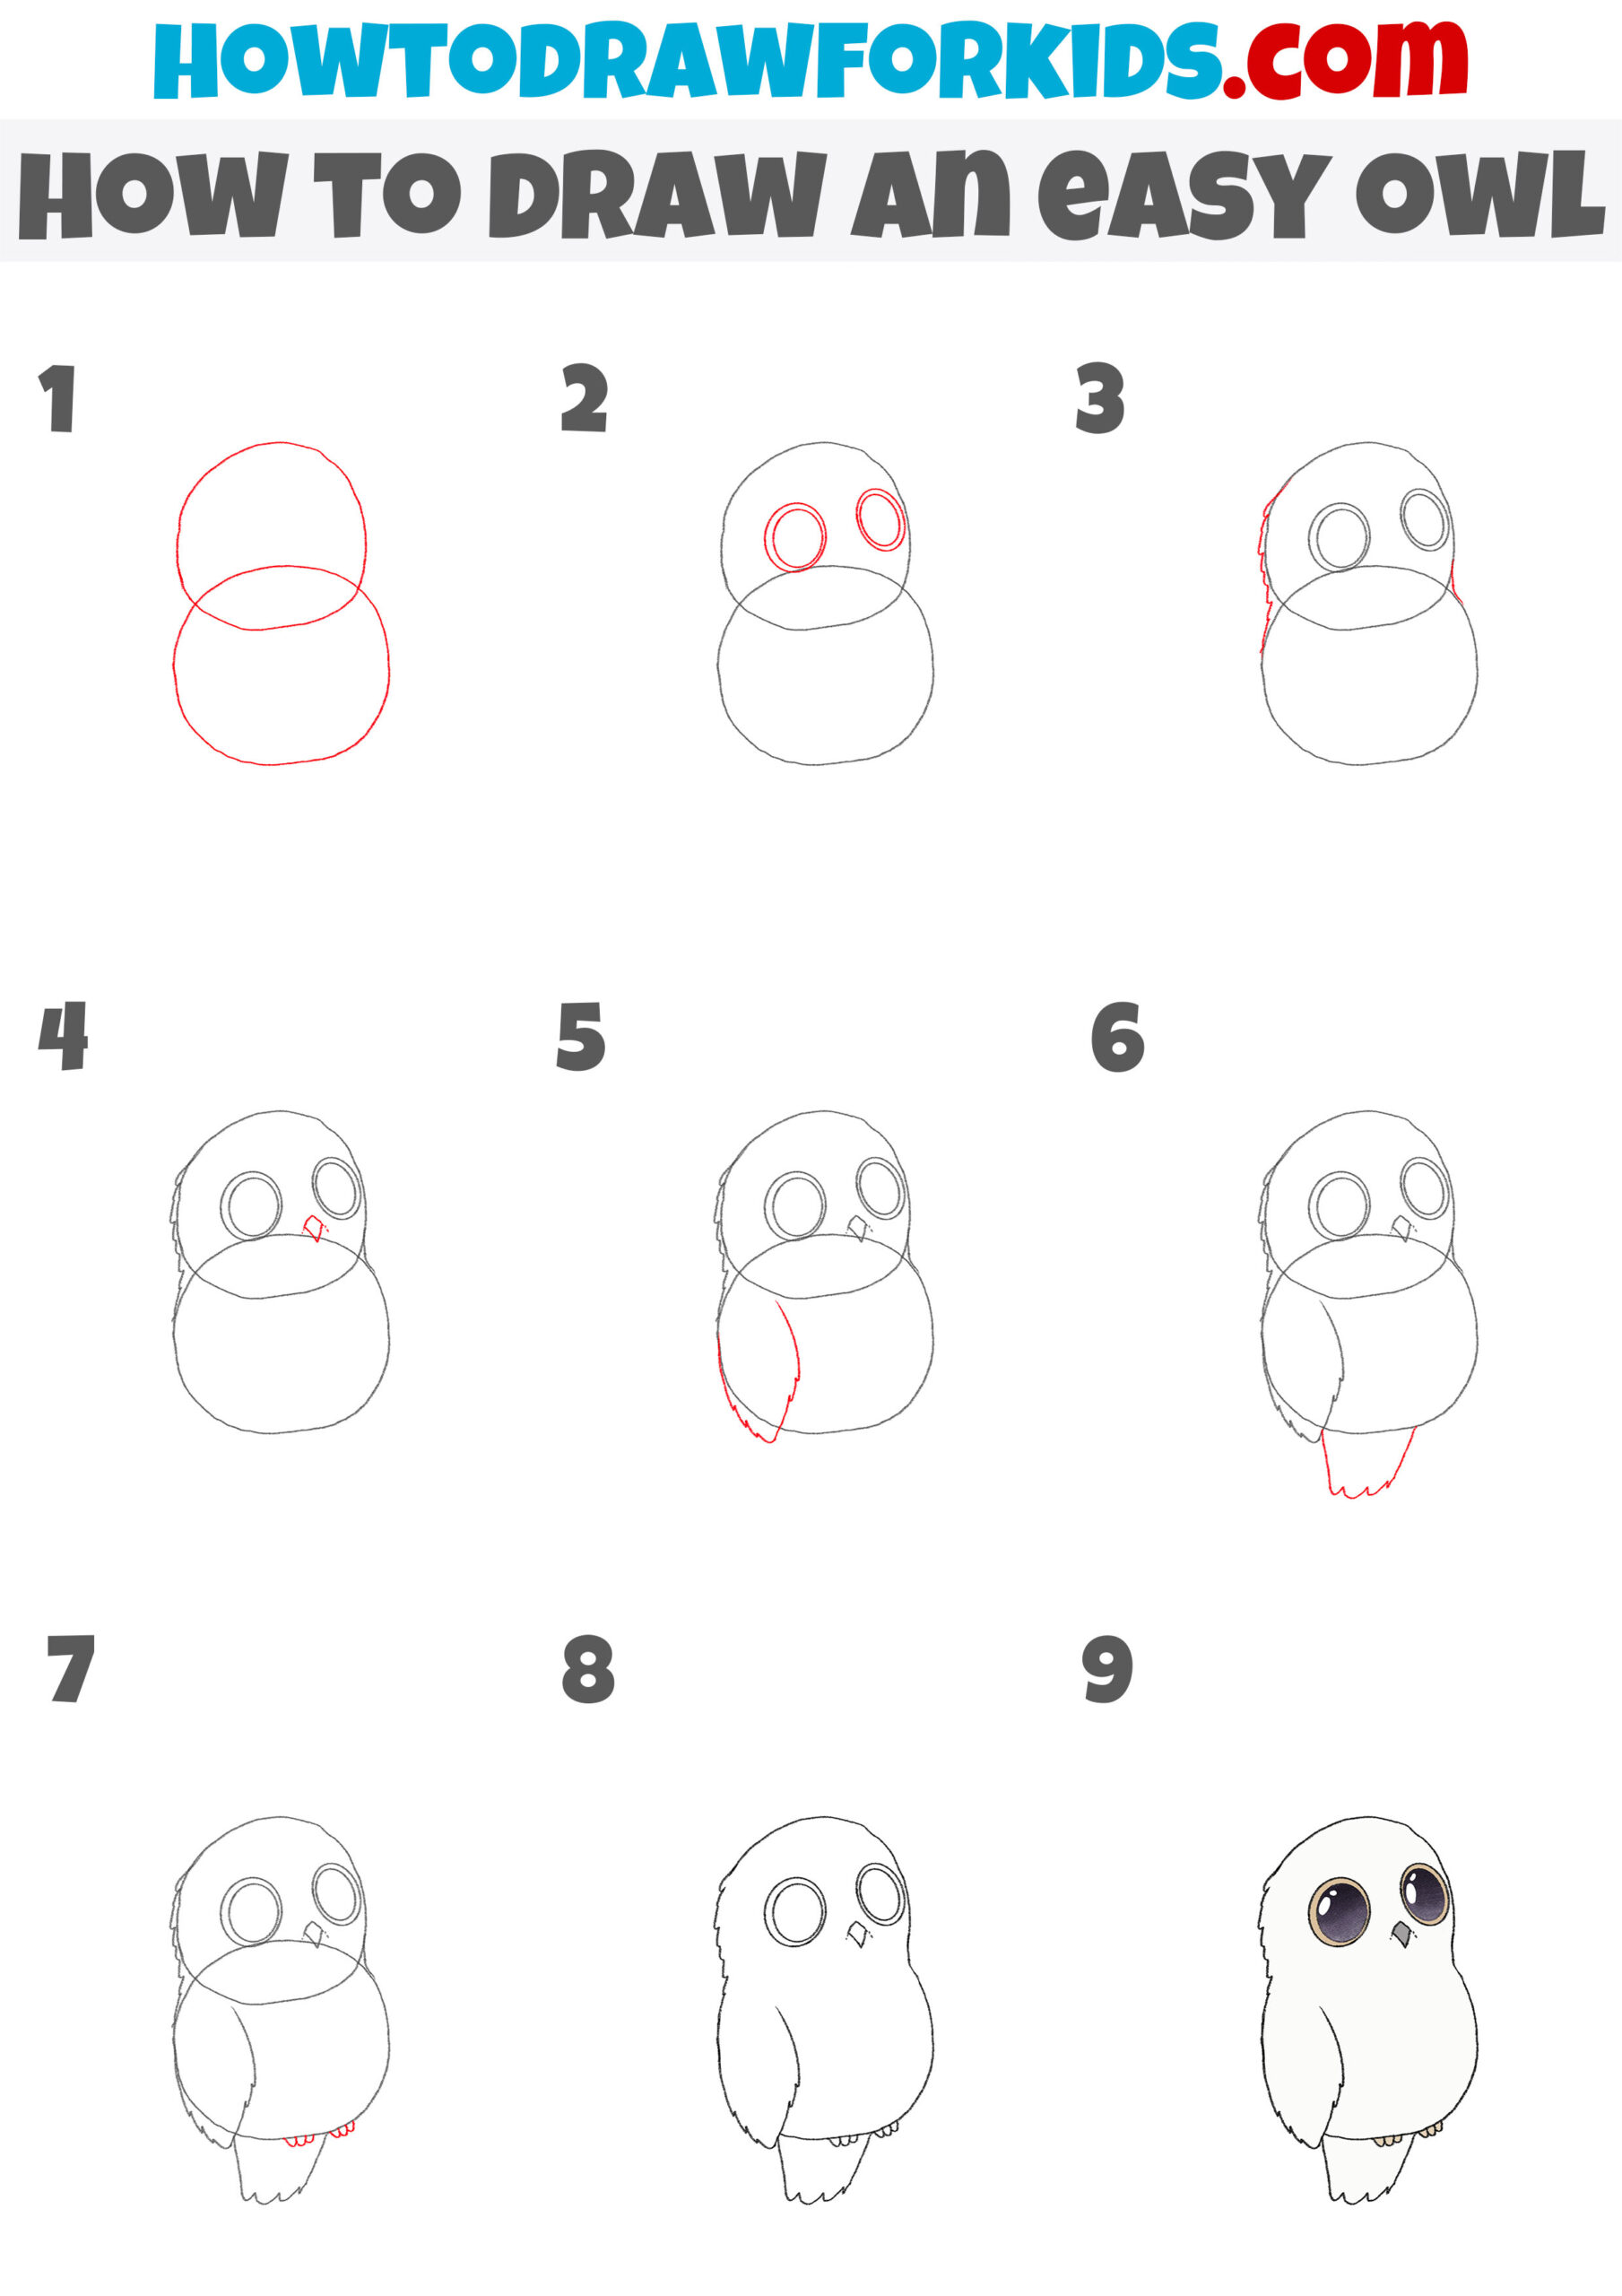 how to draw an easy owl step by step